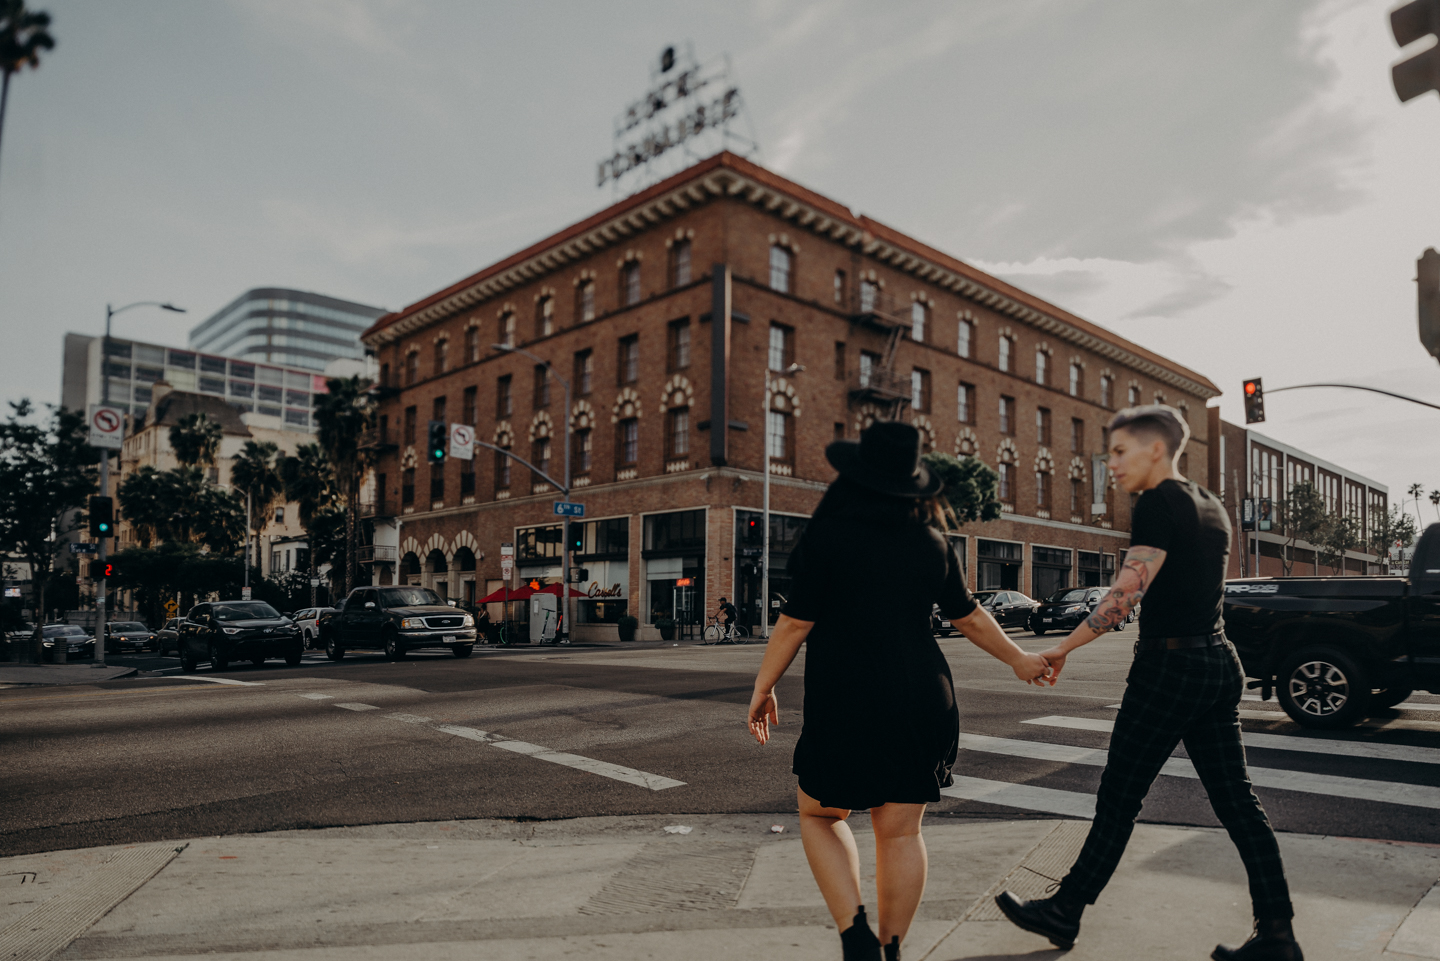 queer wedding photographer in los angeles - lesbian engagement session los angeles - isaiahandtaylor.com-008.jpg